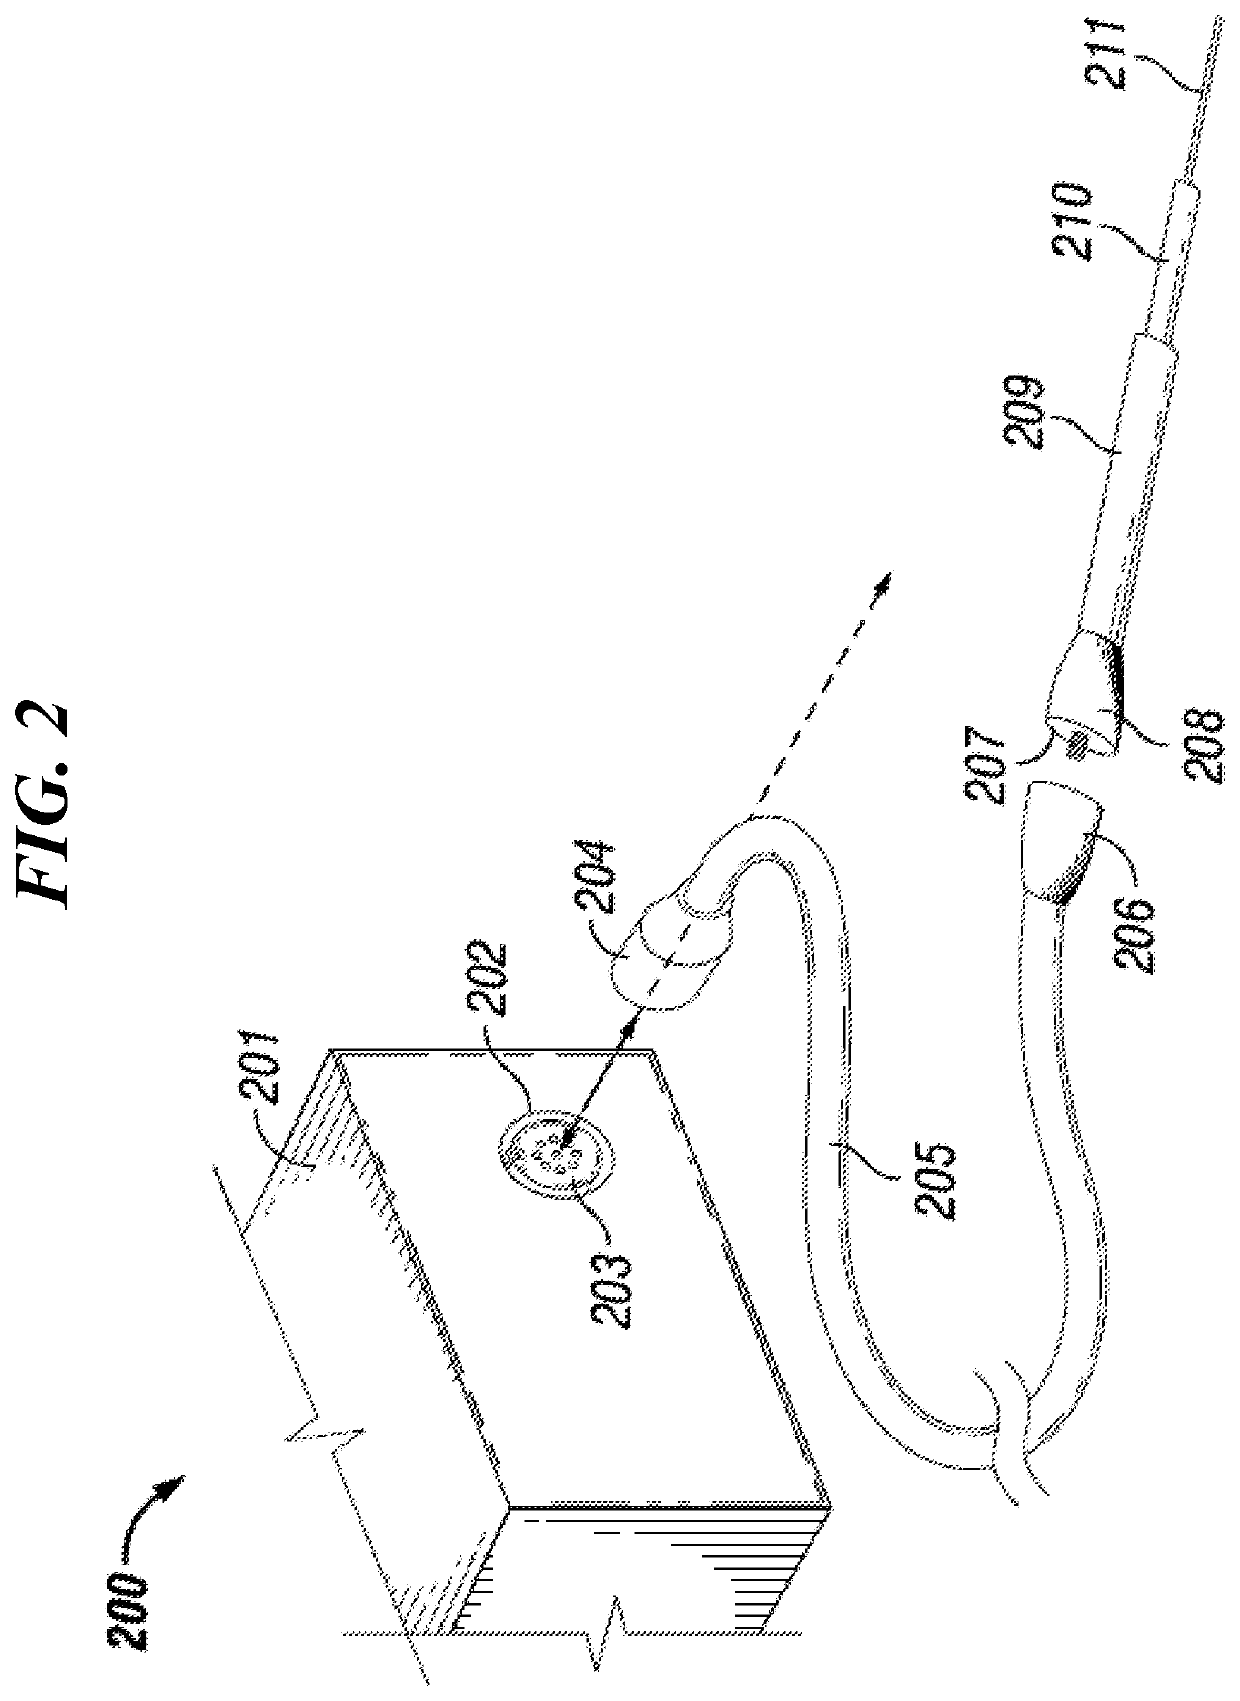 Blood pressure monitoring with zero function system and method